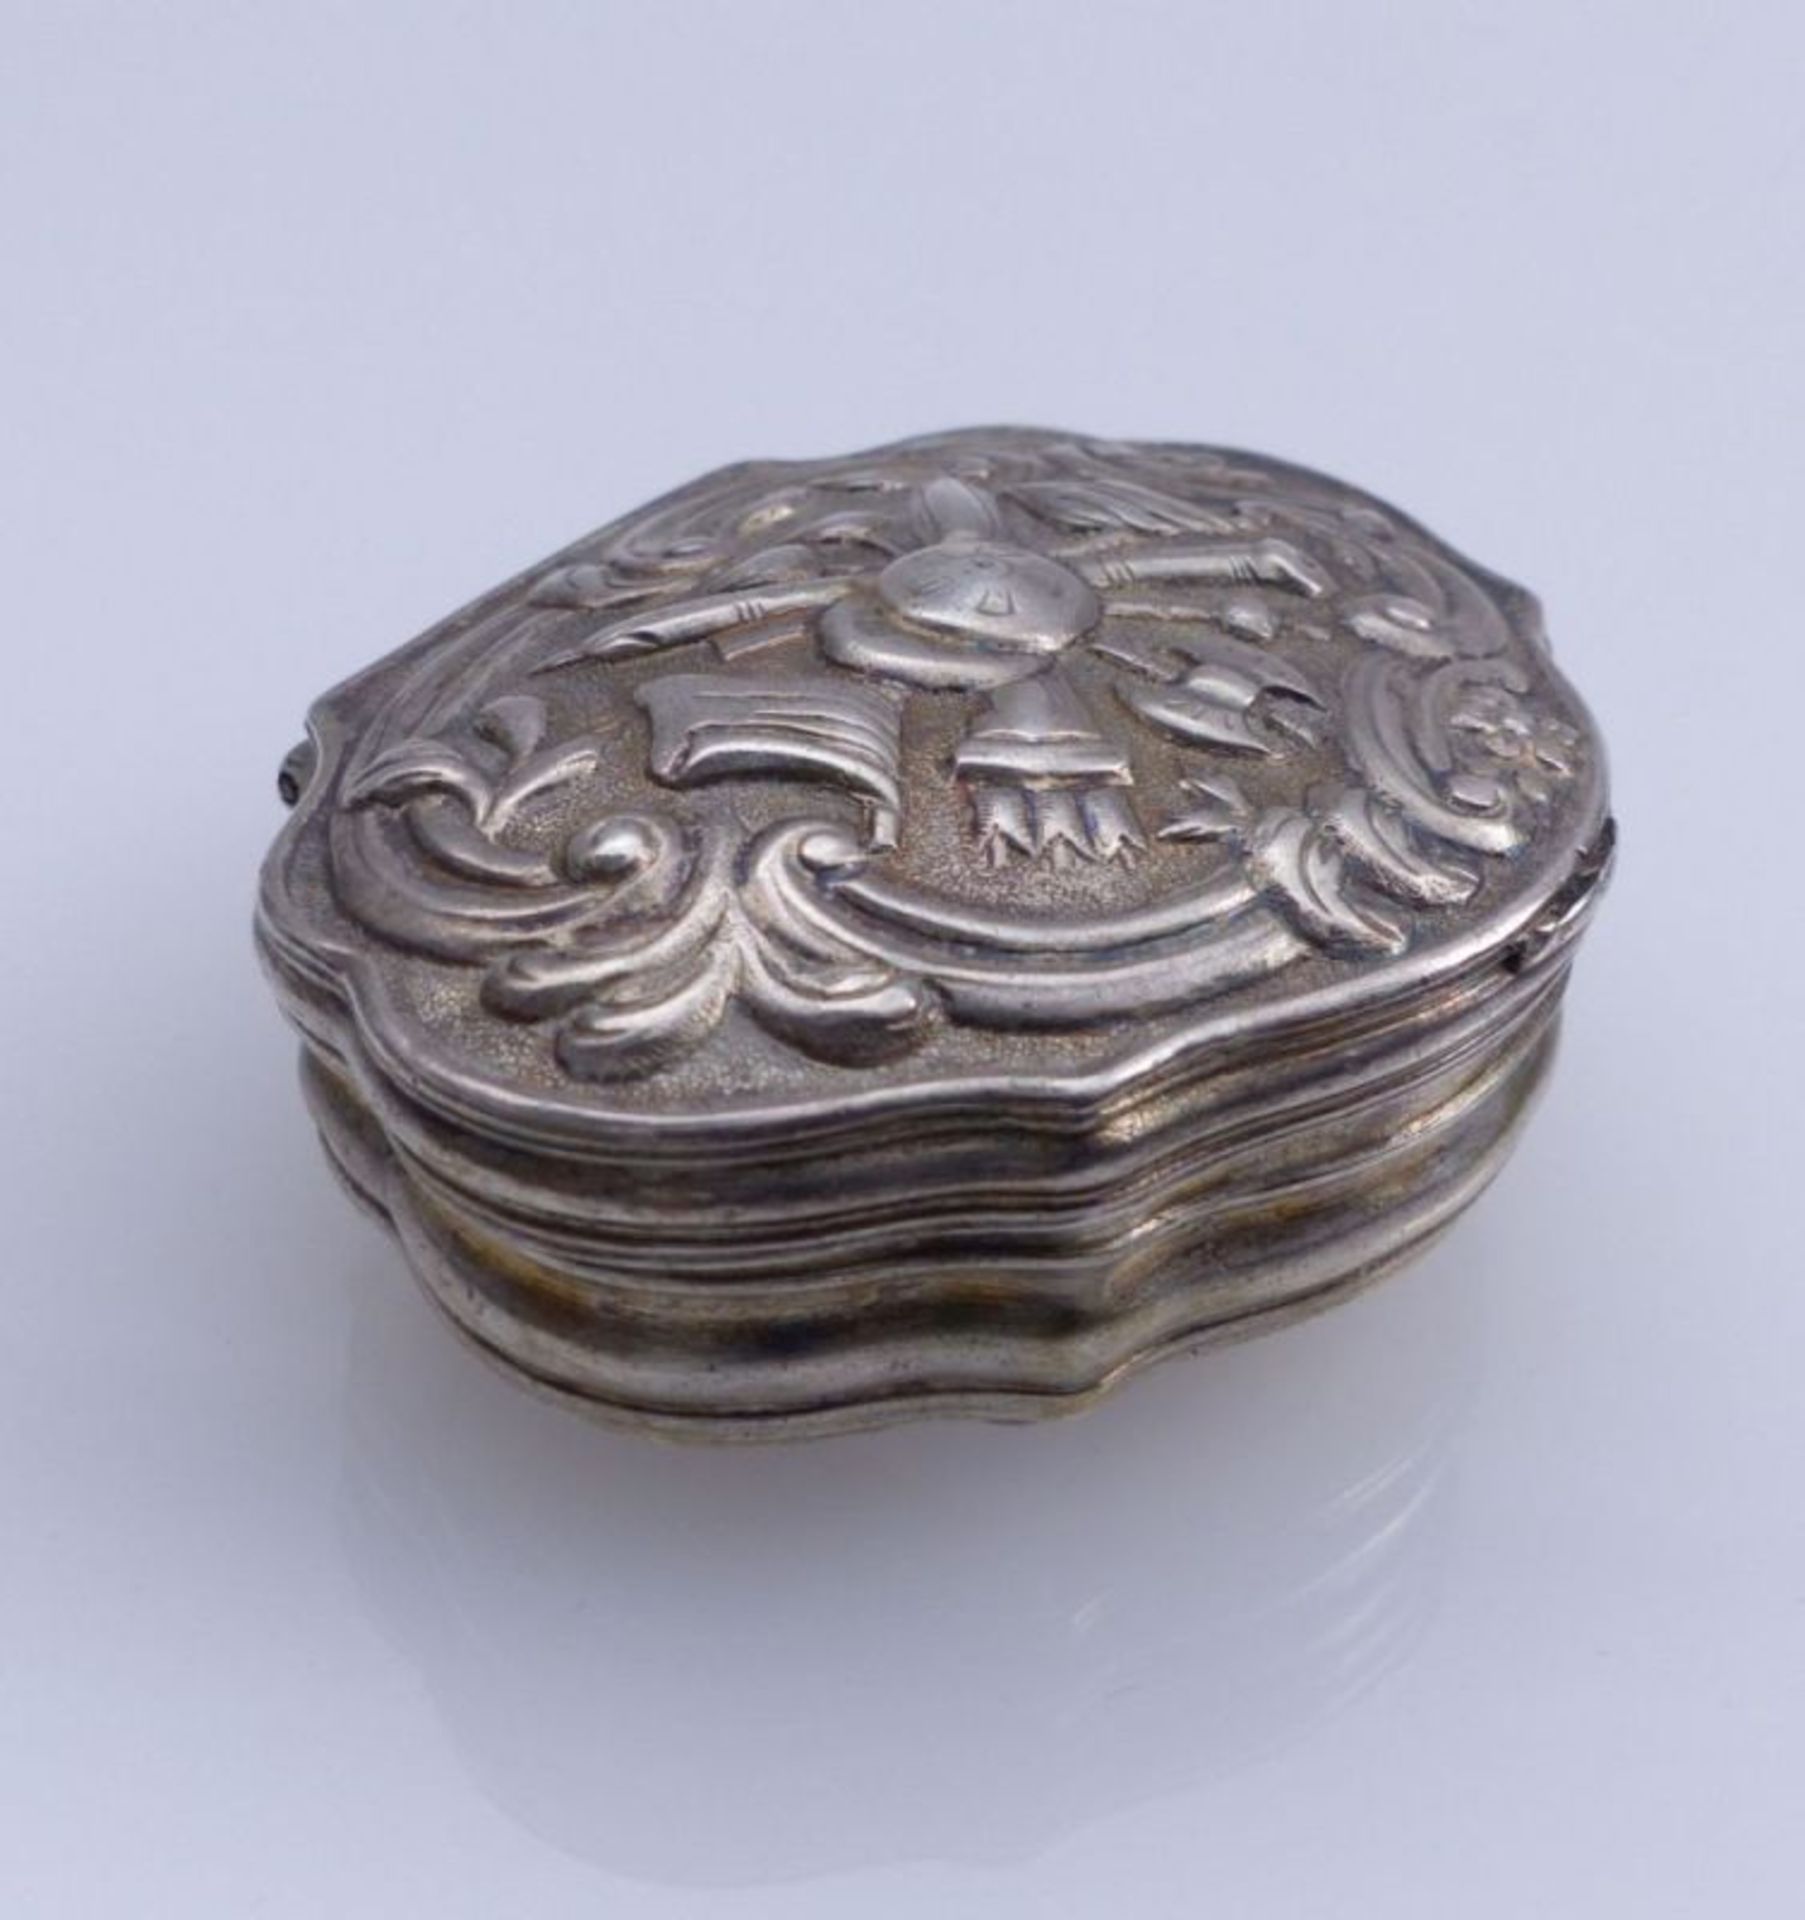 Small Tabatière18th century.Oval, curved shape, hinged lid; the lid is decorated with a drifting